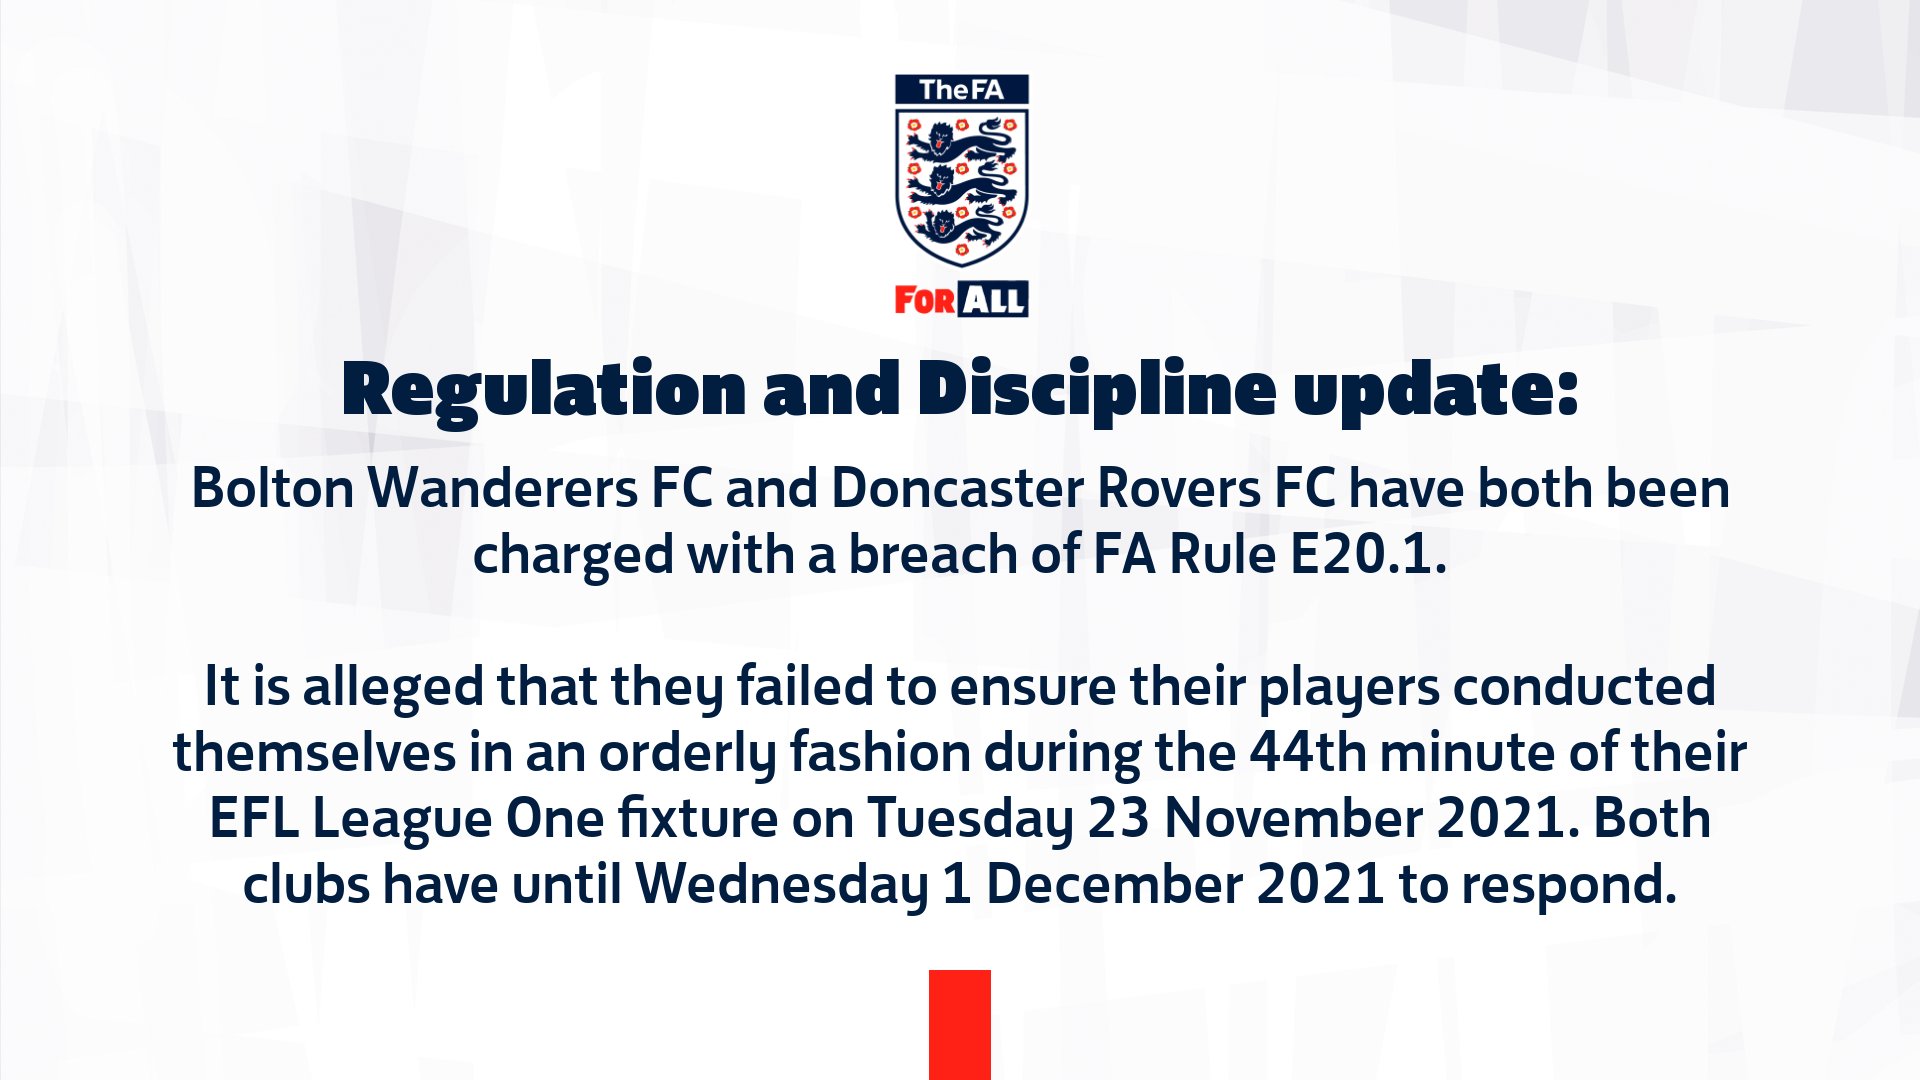 Bolton Wanderers FC and Doncaster Rovers FC have both been charged with a breach of FA Rule E20.1. It is alleged that they failed to ensure their players conducted themselves in an orderly fashion during the 44th minute of their EFL League One fixture on Tuesday 23 November 2021. Both clubs have until Wednesday 1 December 2021 to respond.